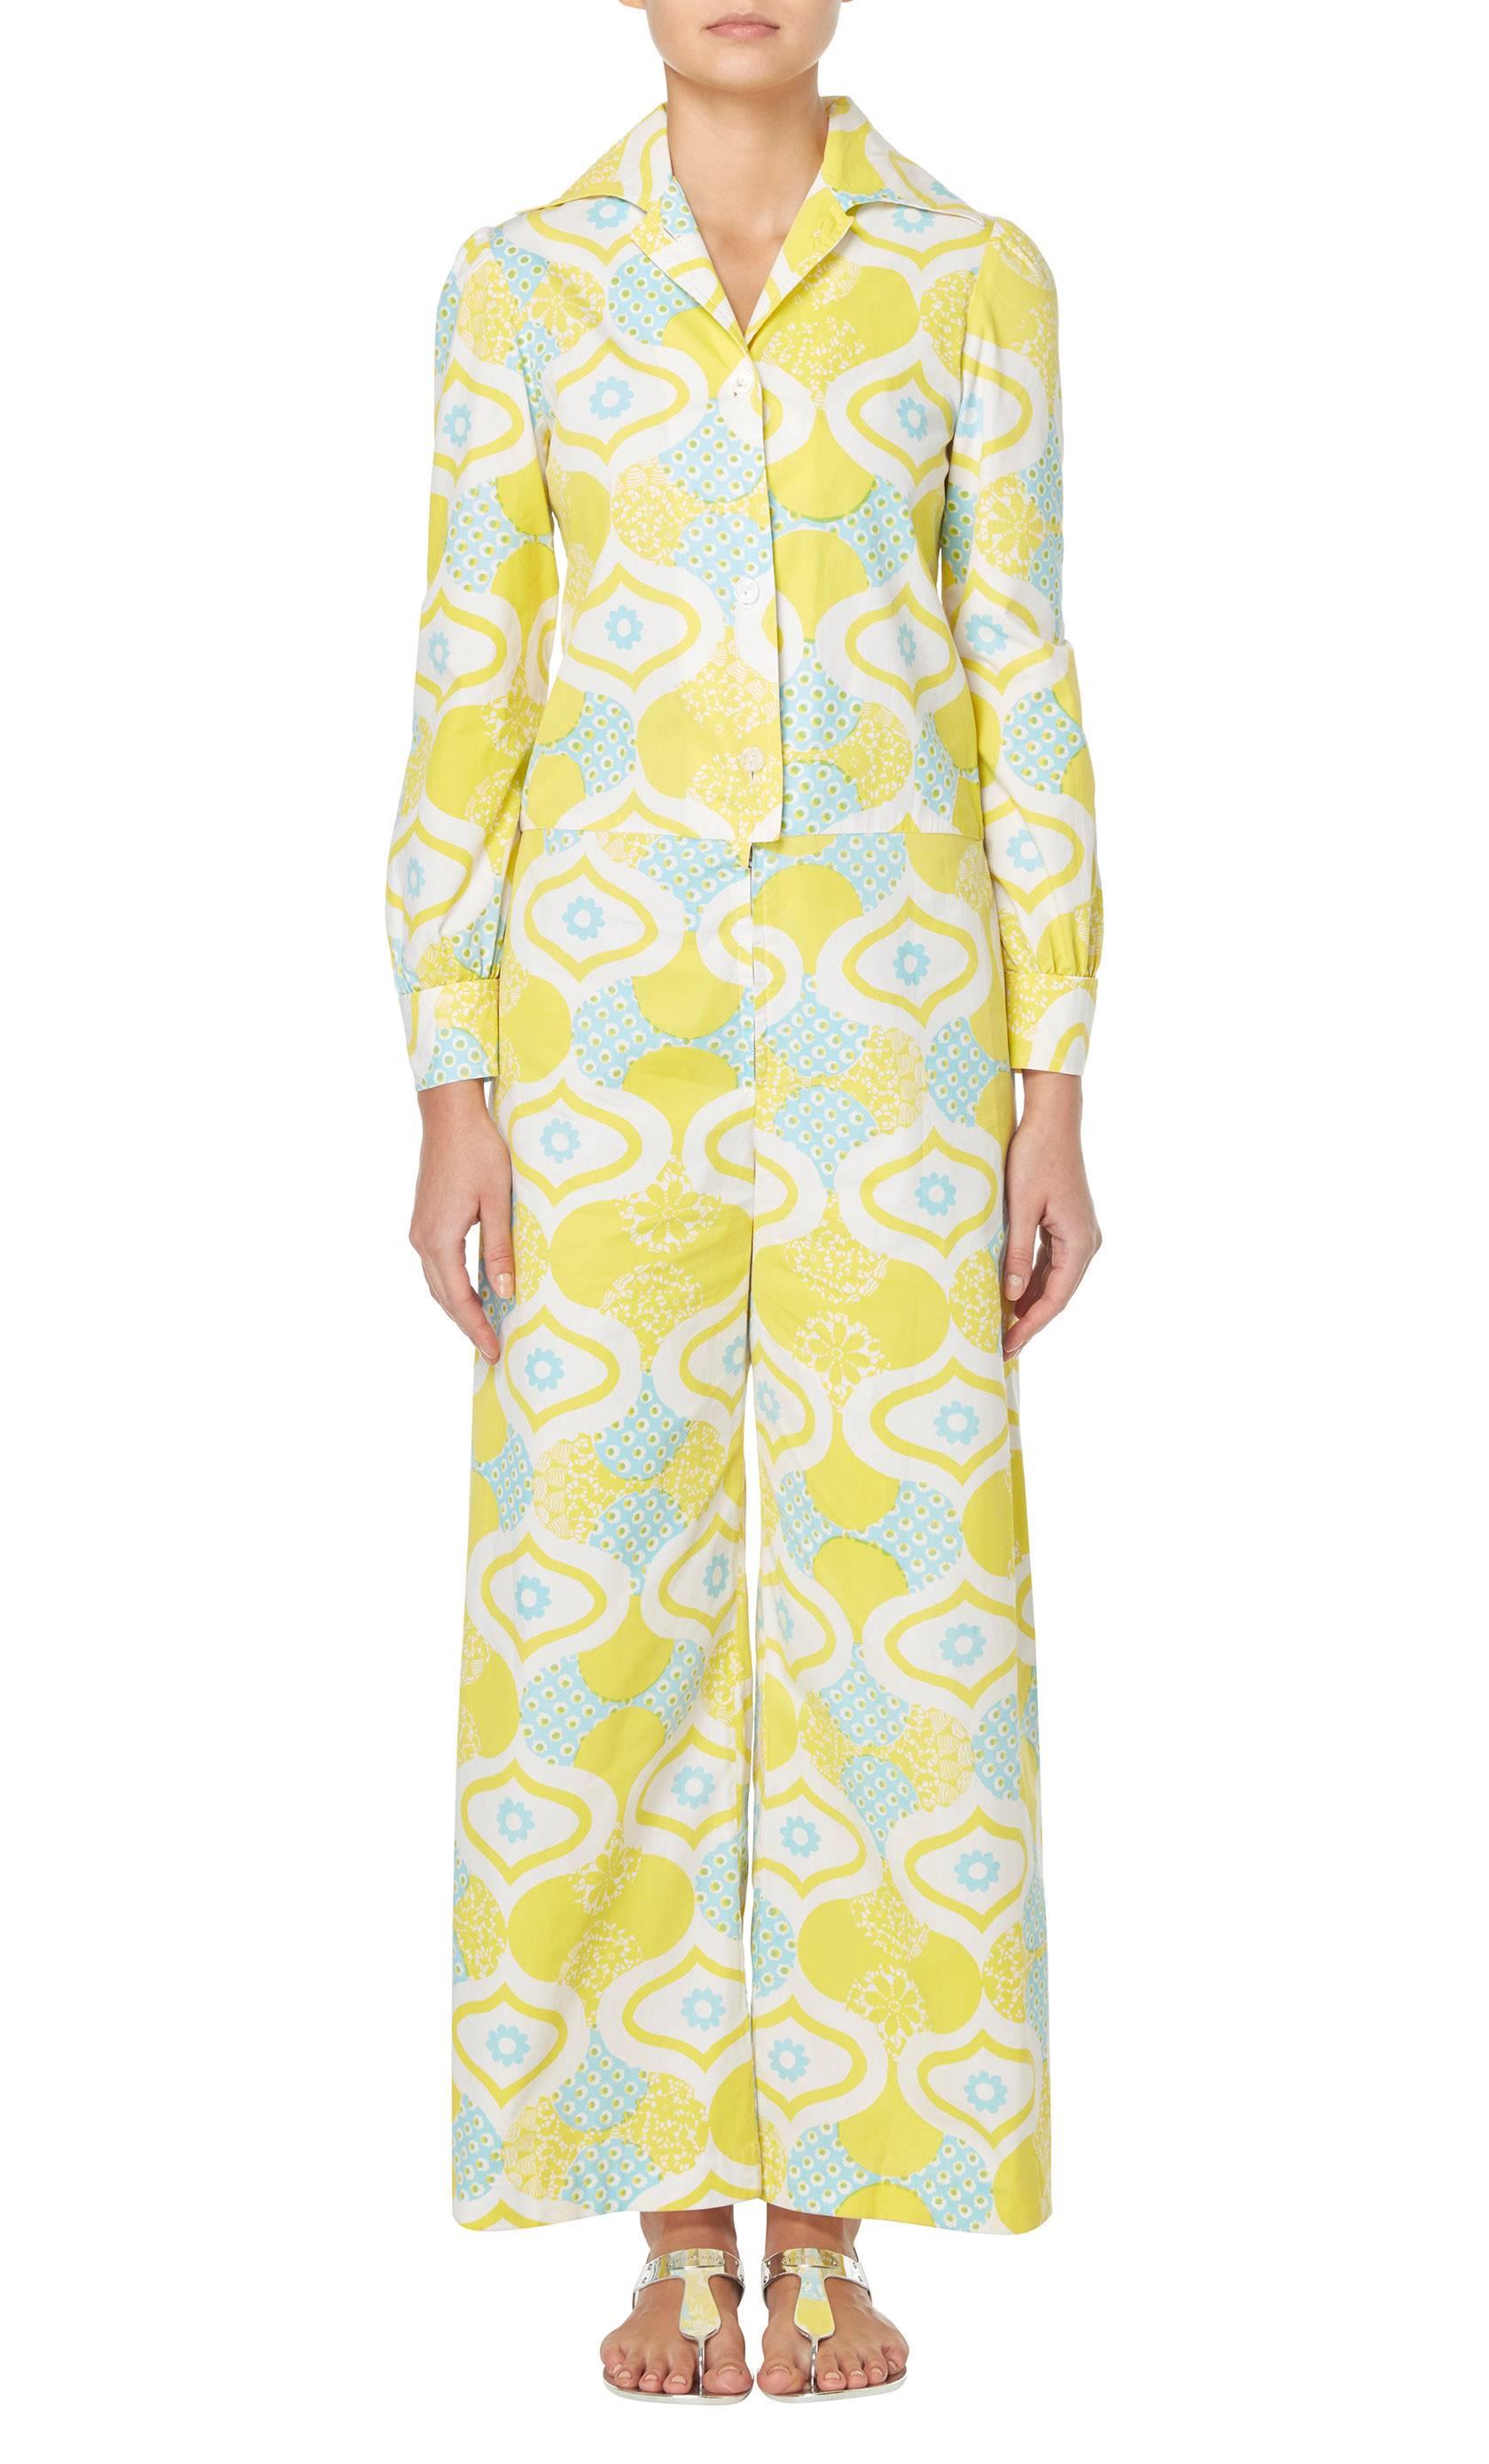 A fantastic piece of fashion history, this jumpsuit is from the 'Twiggy' line, created by the famous model in the 1960s. Constructed in cotton, the jumpsuit features an ivory, blue and yellow geometric print, making it the perfect alternative to a